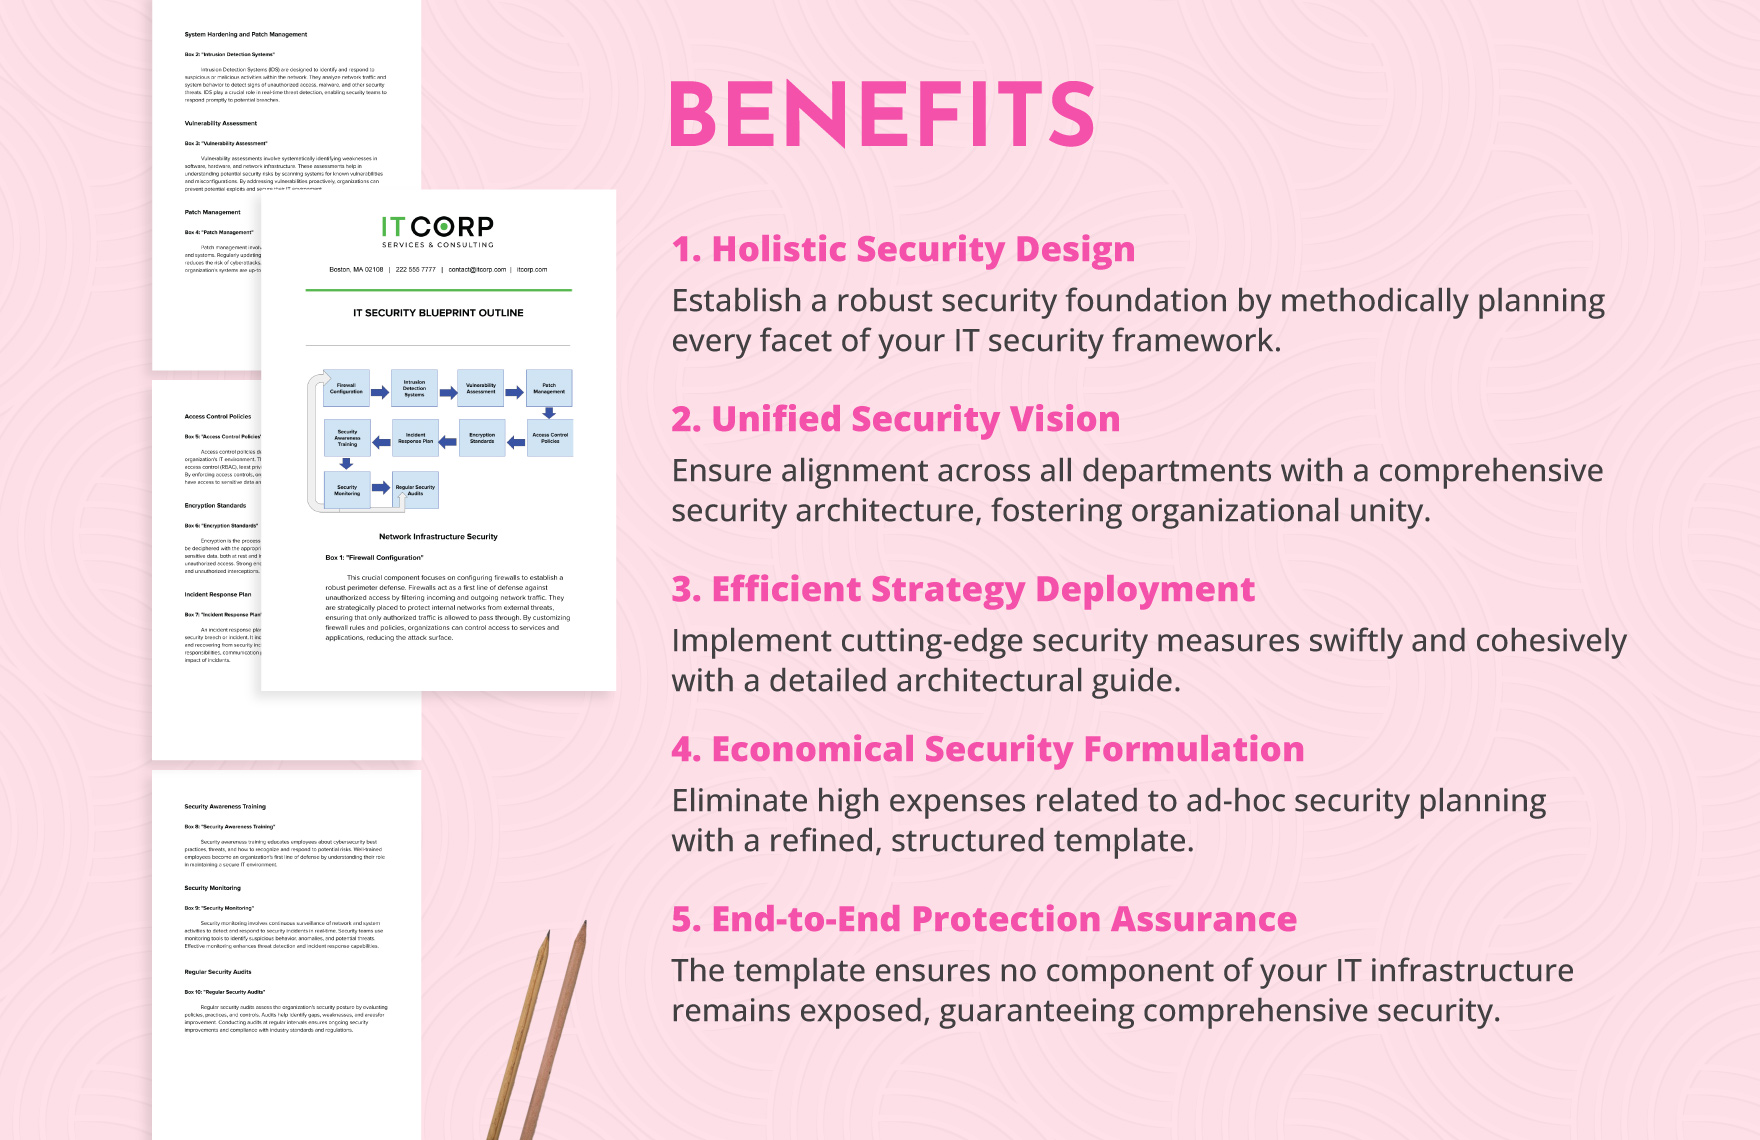 IT Security Blueprint Outline Template